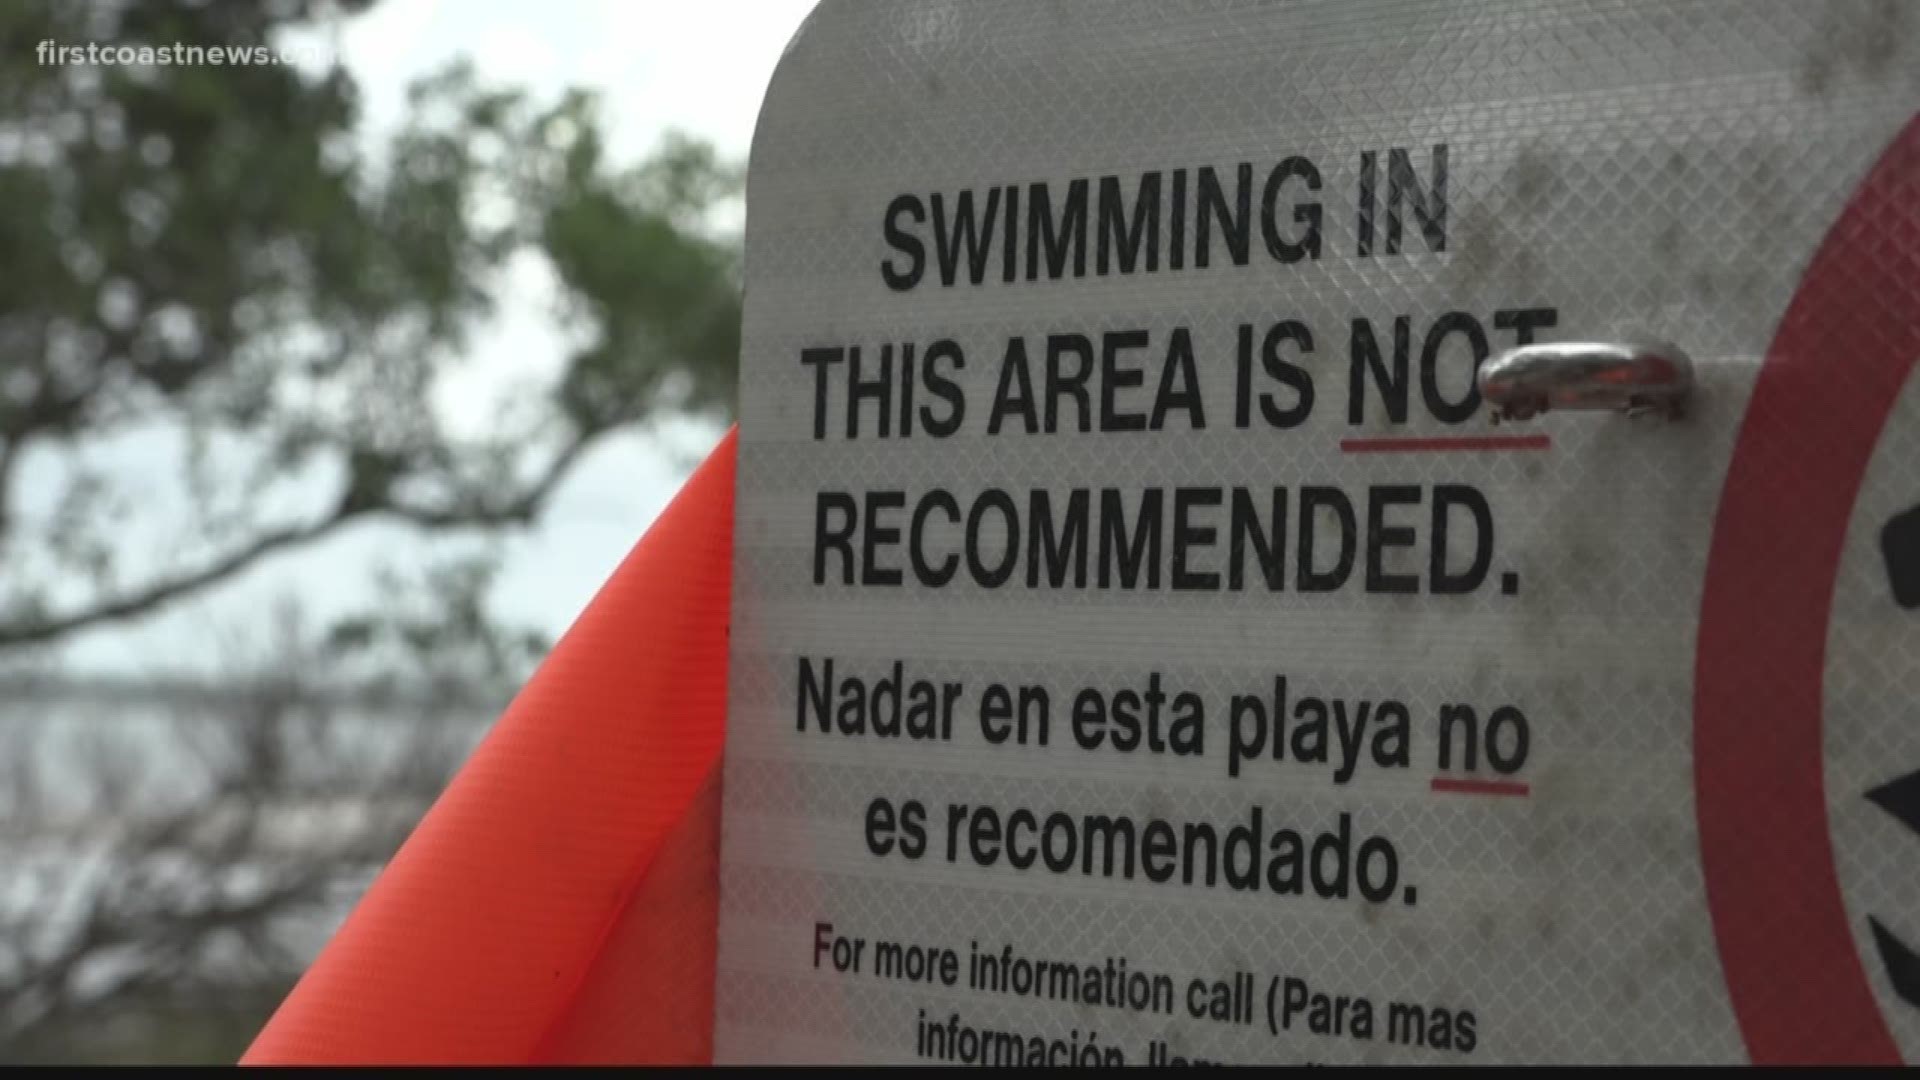 Georgia has issued more than 200 coastal swimming advisories since 2007. Some beaches are so perpetually polluted, they carry permanent warnings.